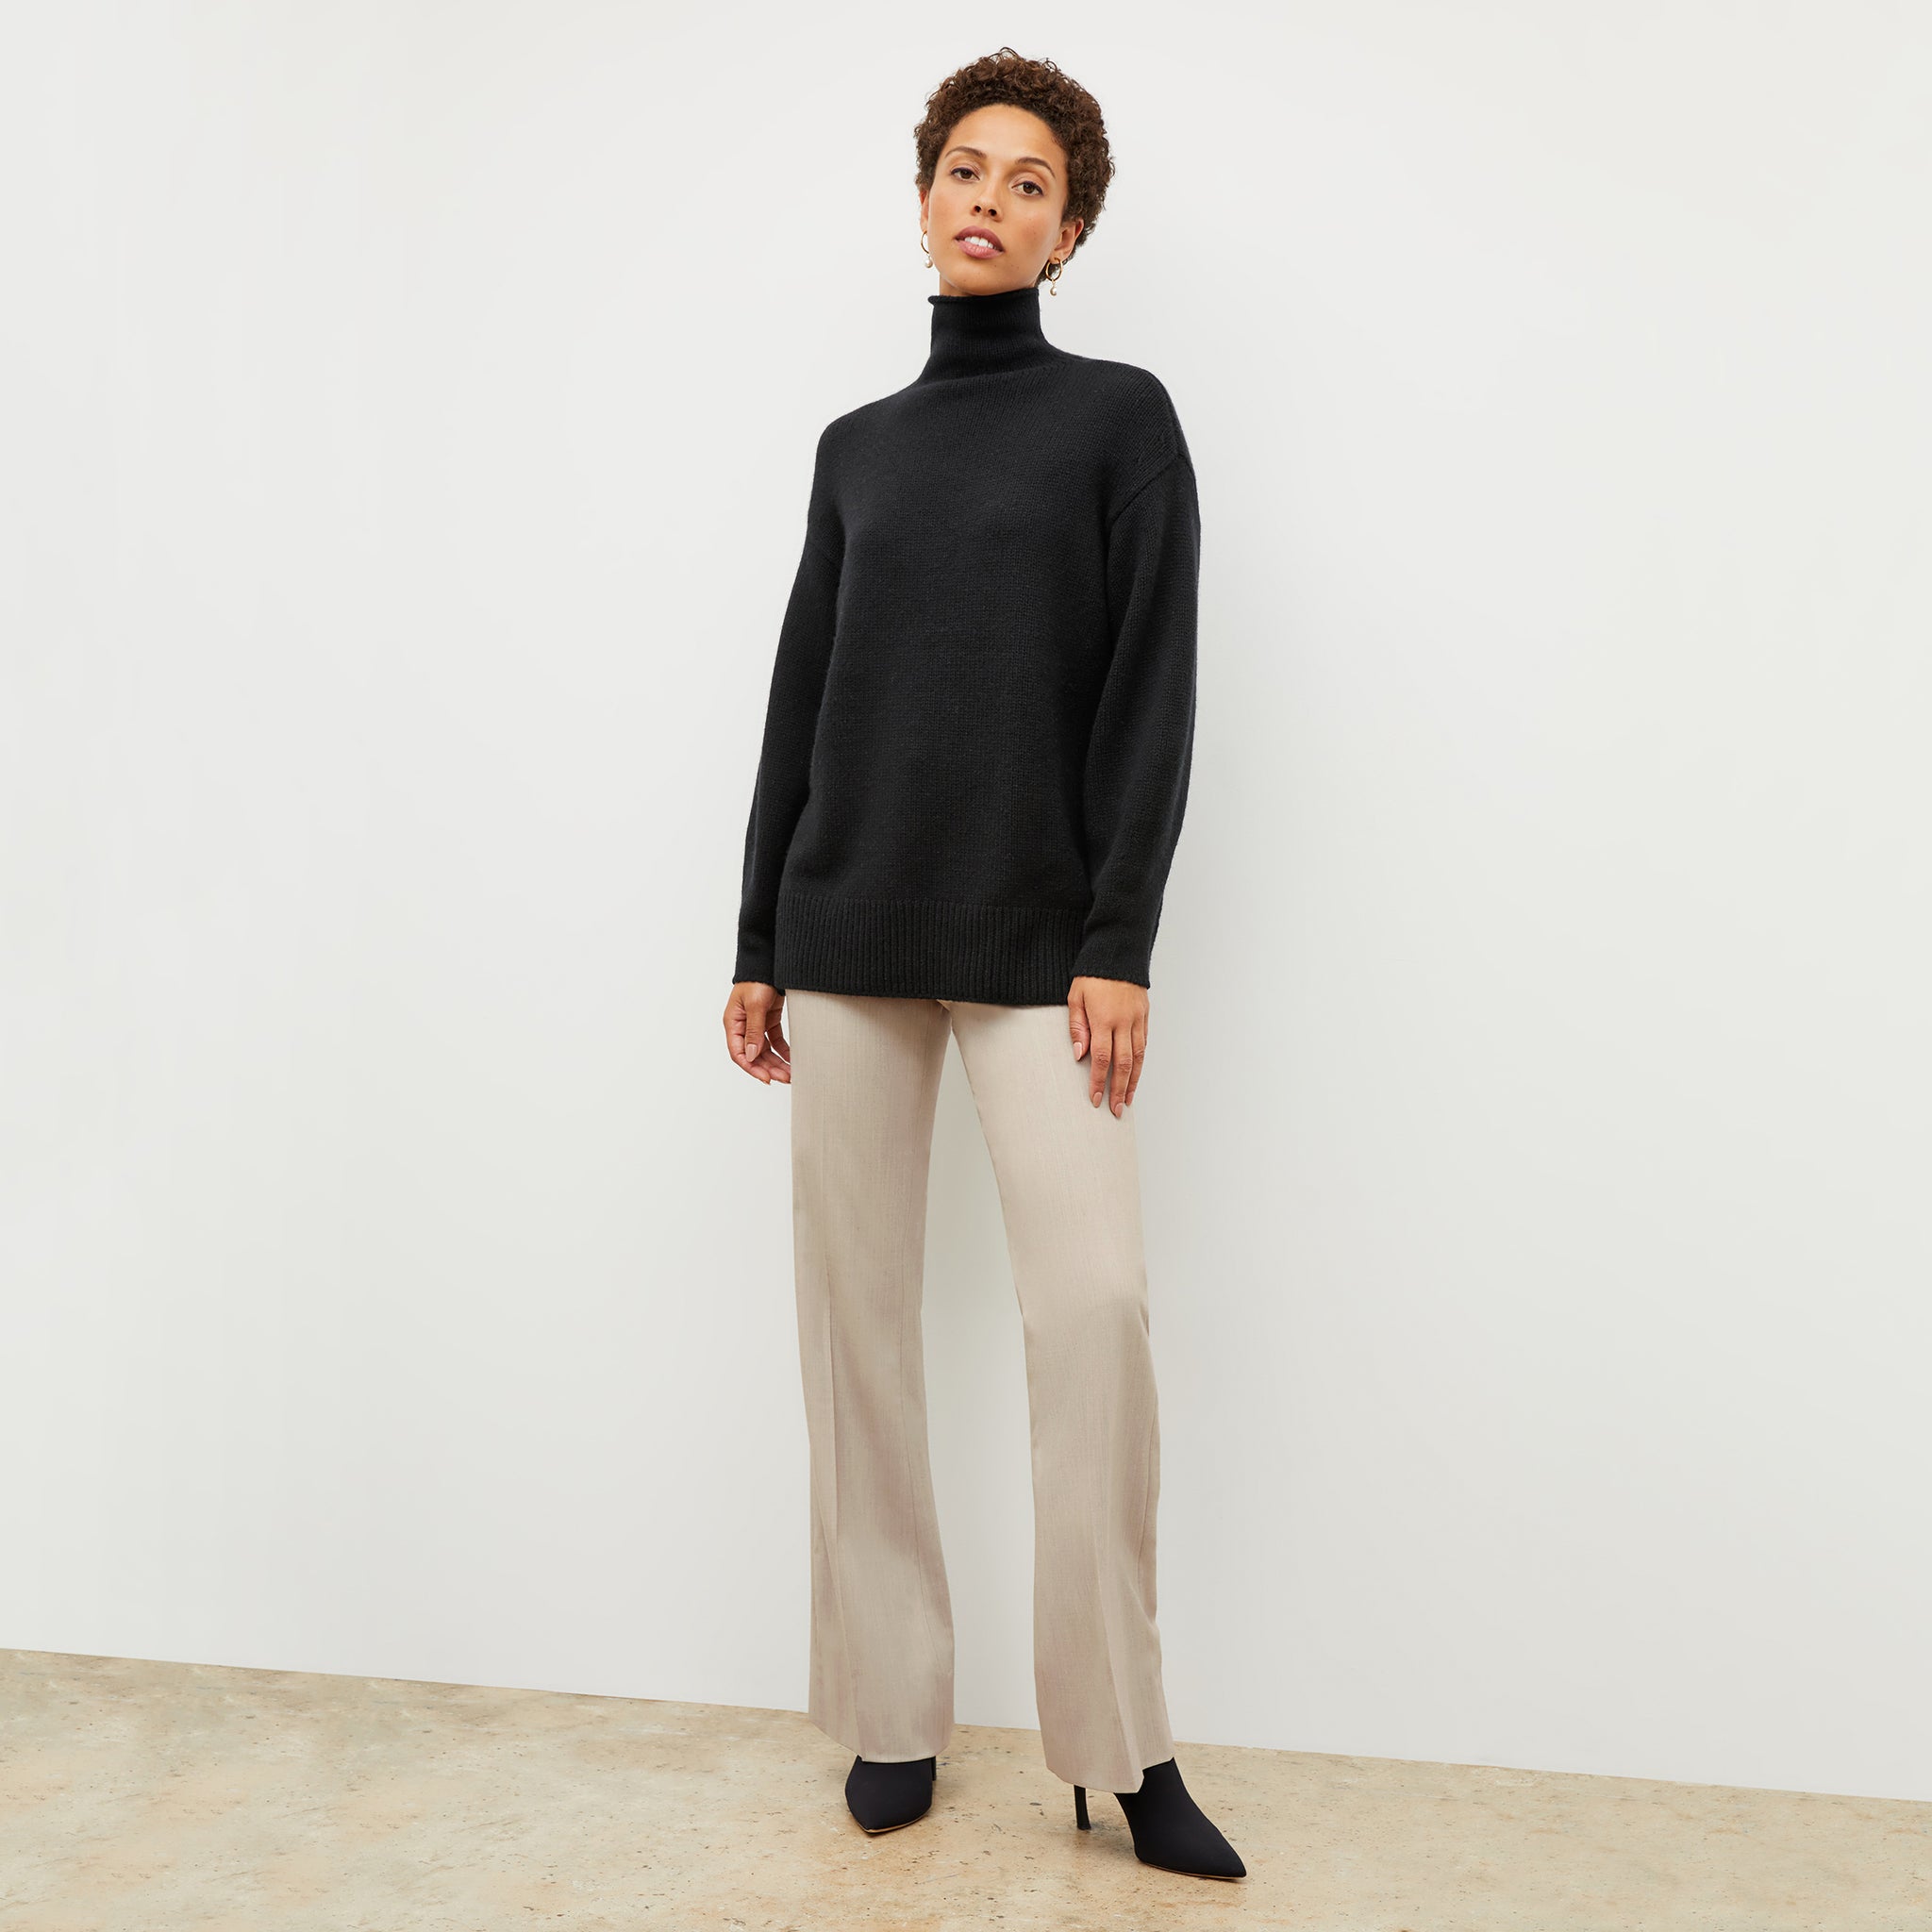 Front image of a woman wearing the lea sweater in black